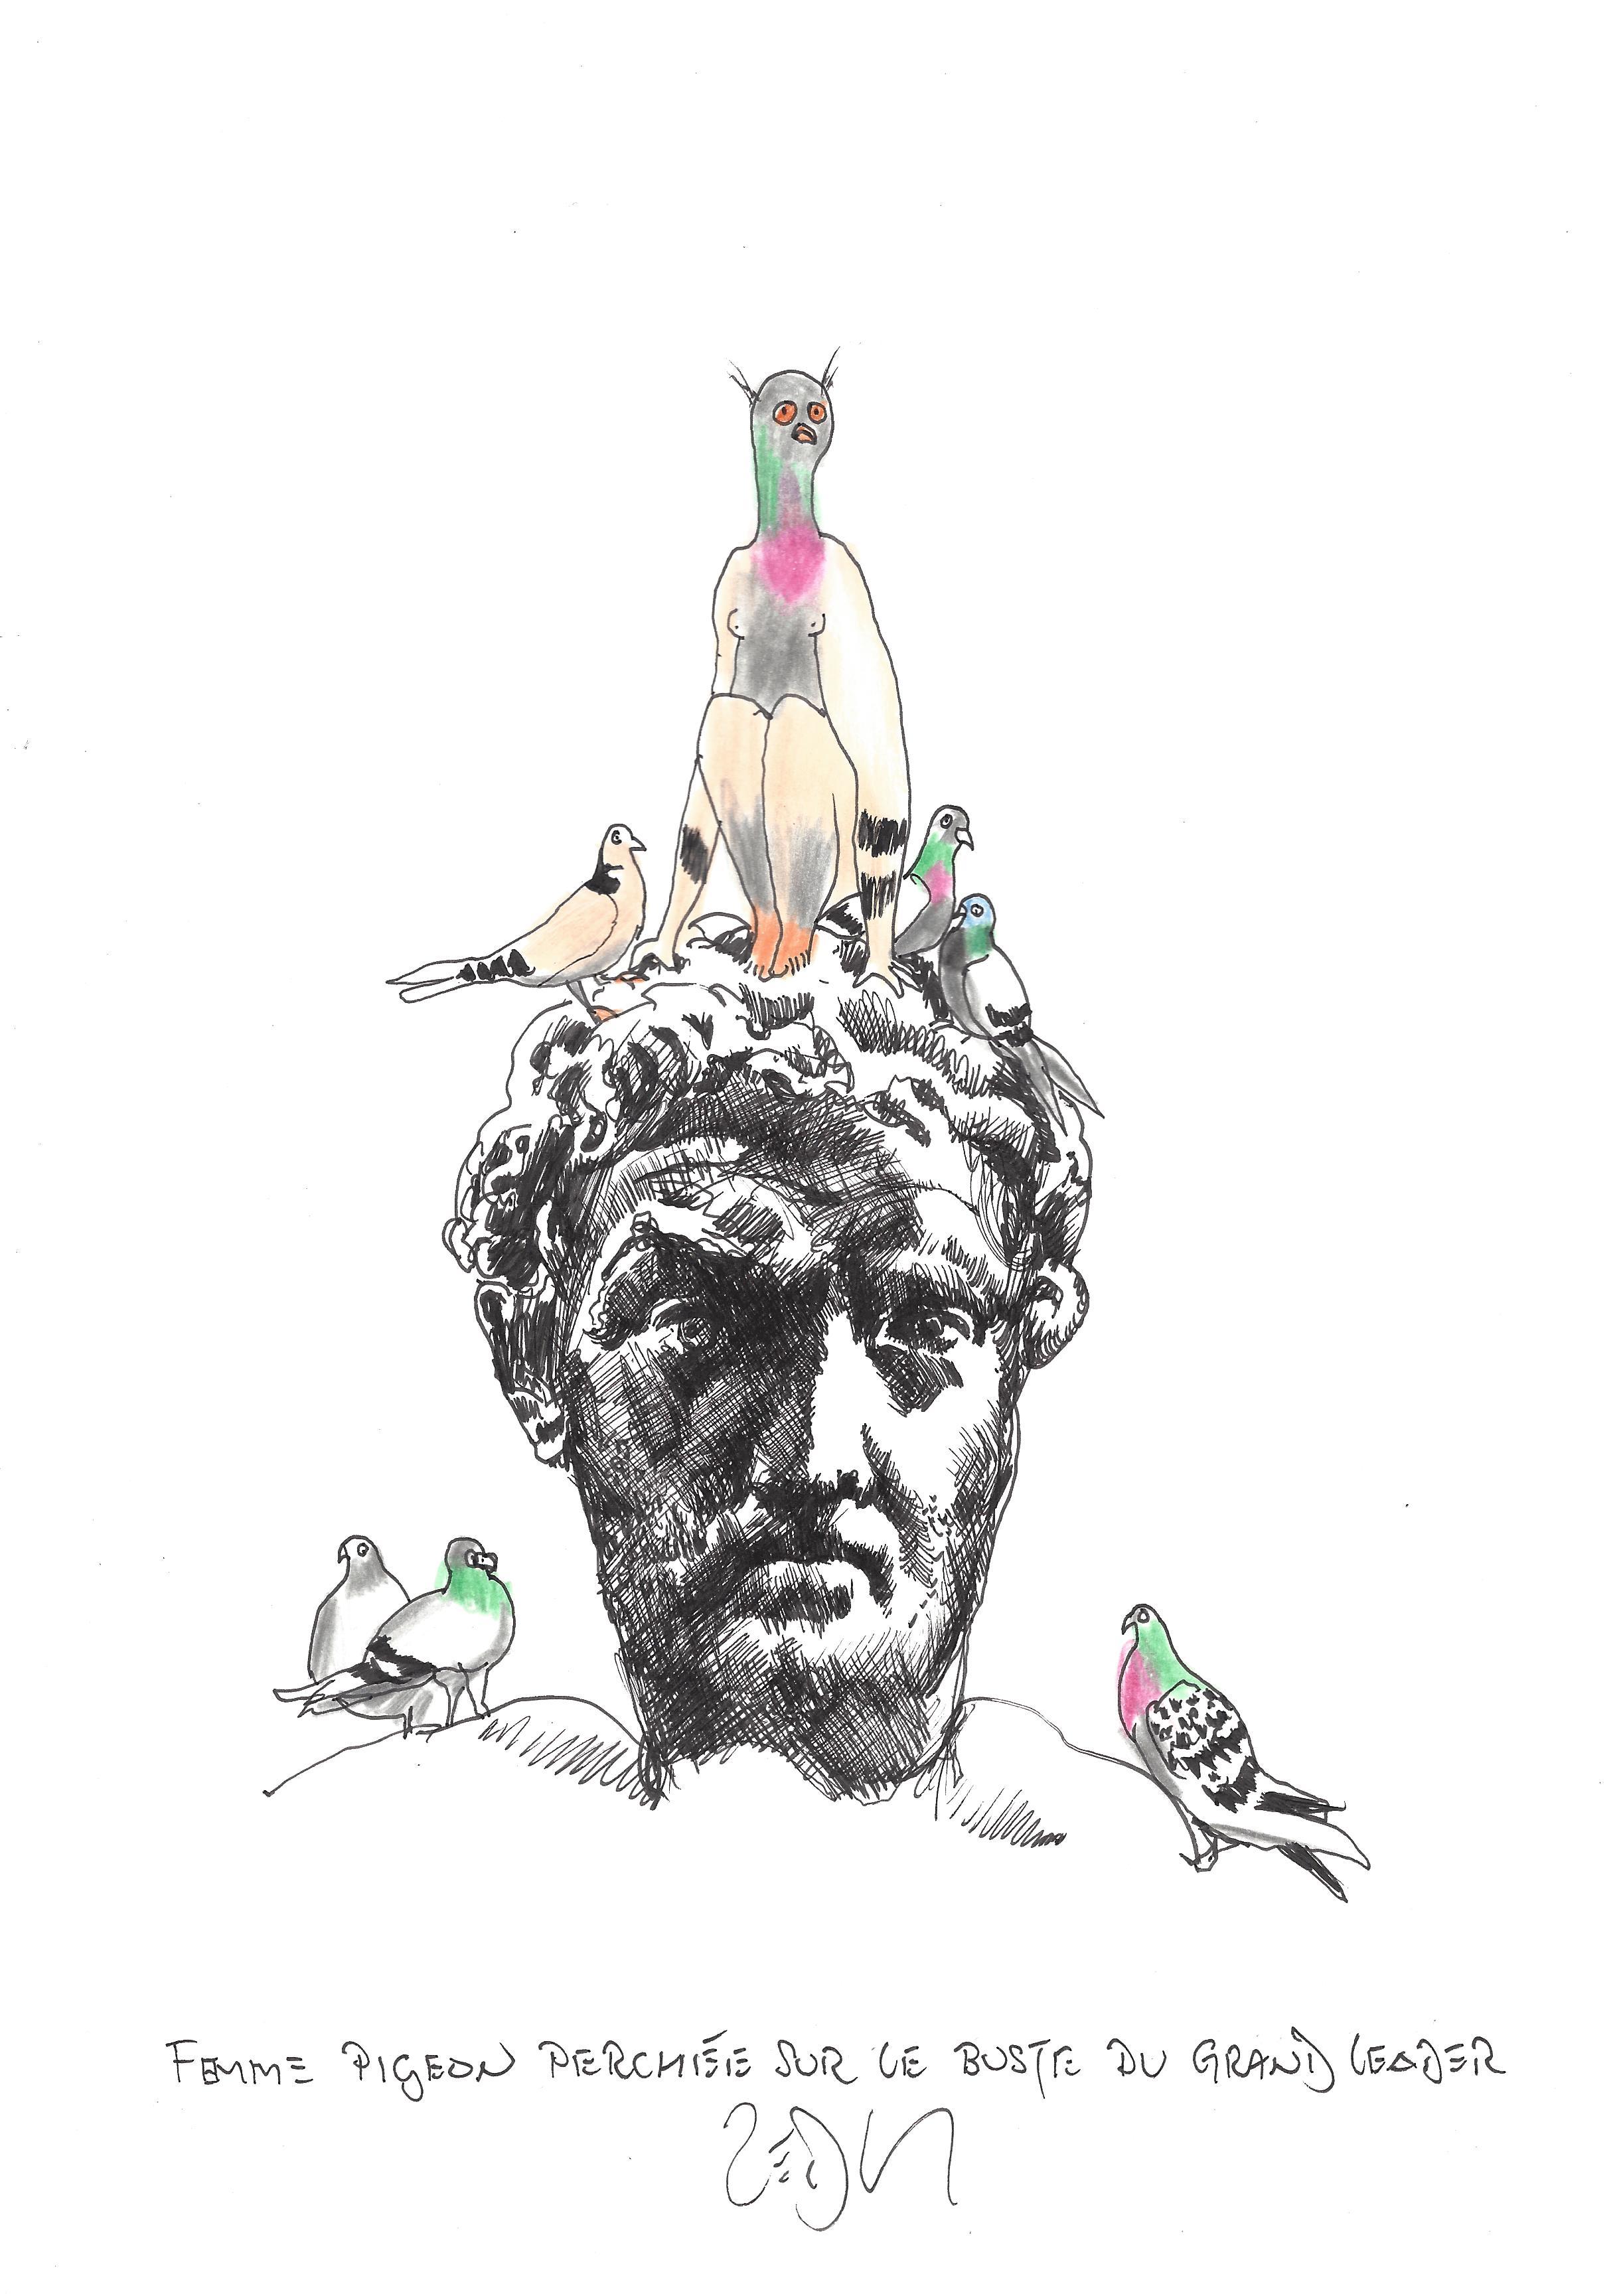 « Pigeon lady perches on the bust of the great leader – Femme pigeon perchee sur le buste du grand leader »